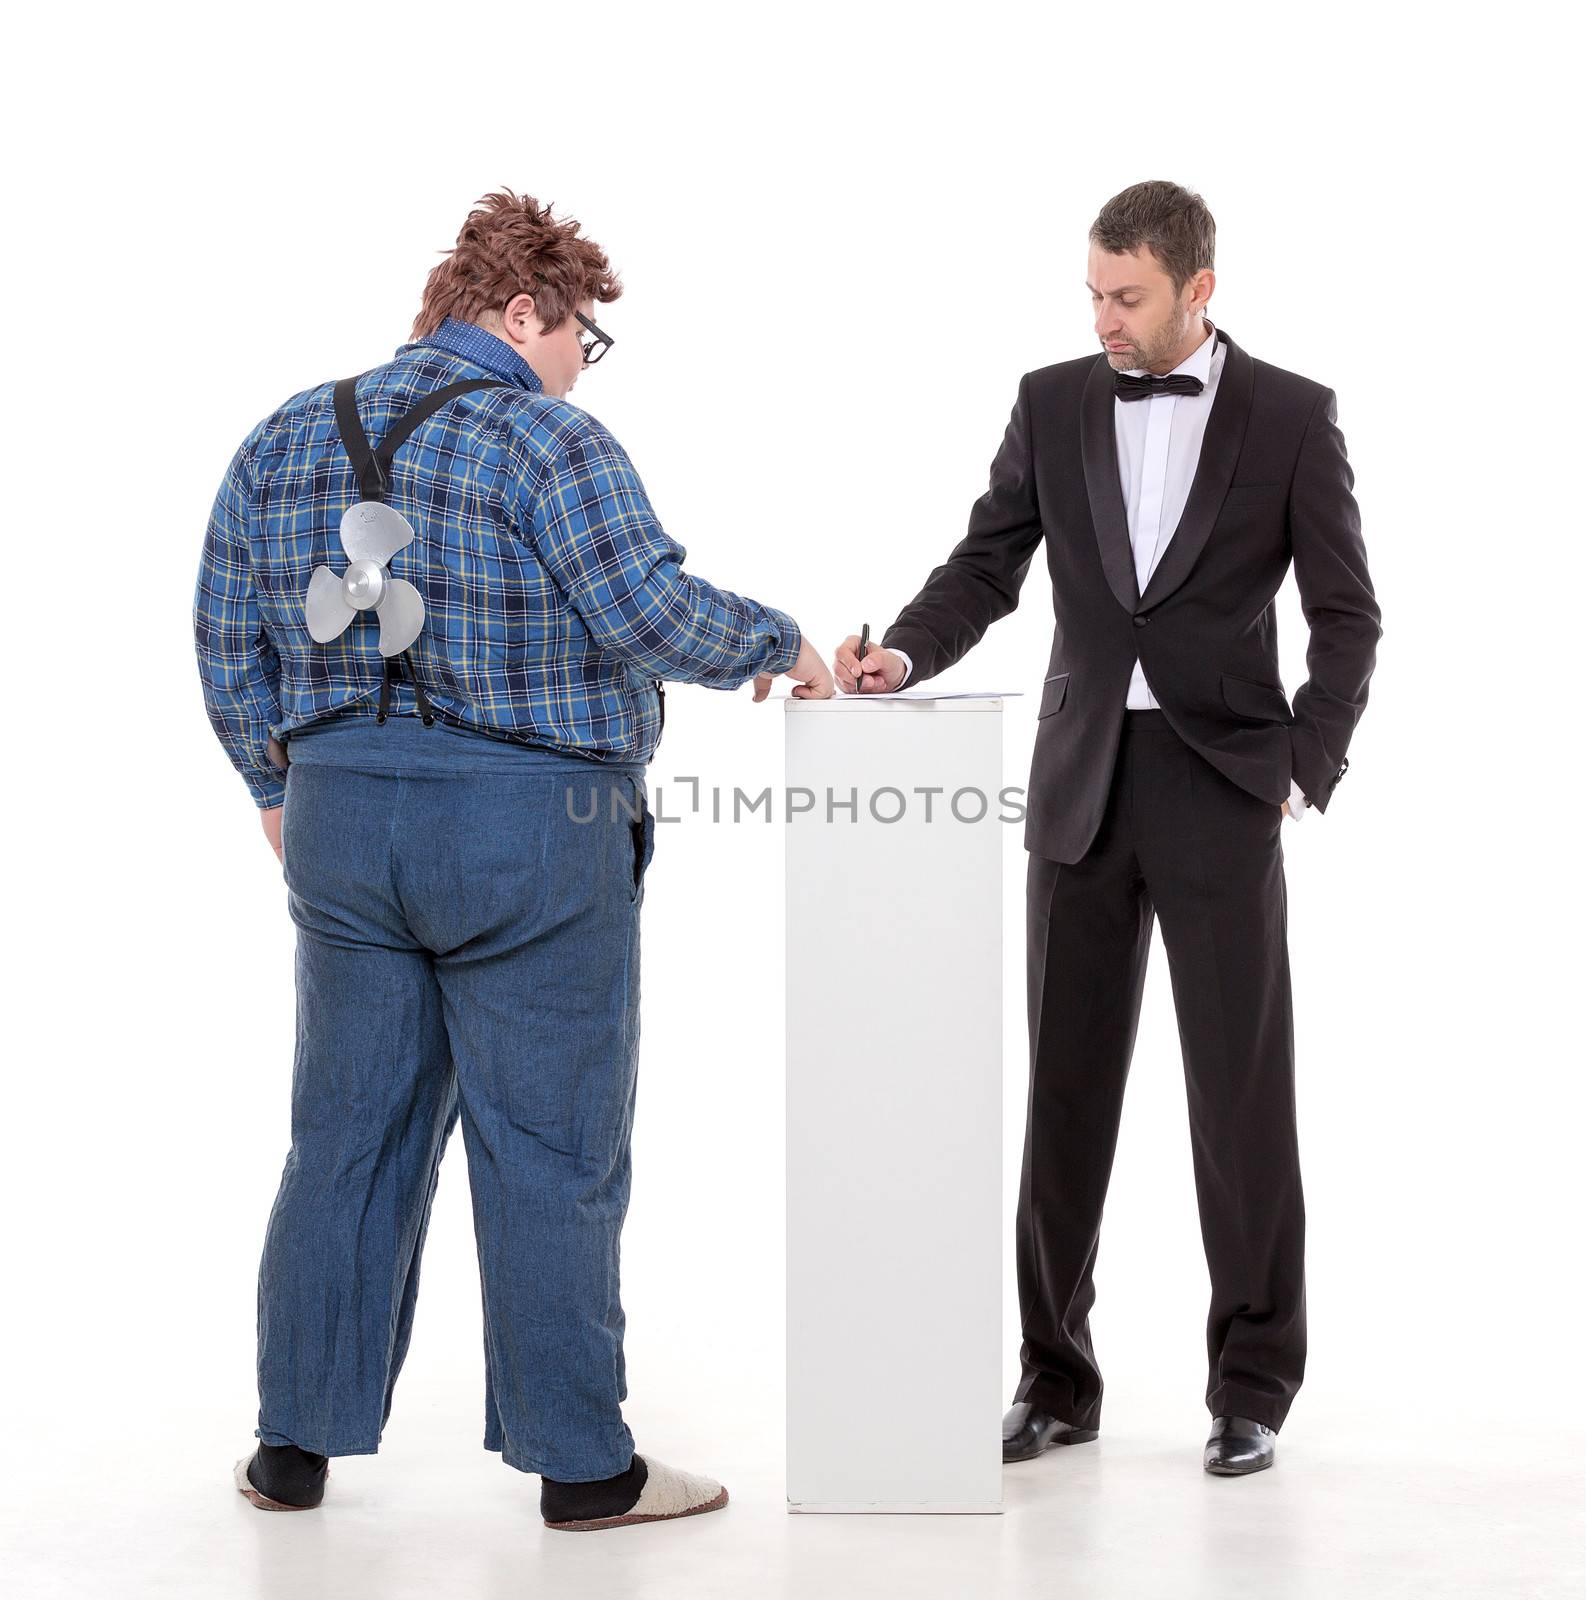 Elegant man in a tuxedo and bow tie standing arguing with an overweight country yokel